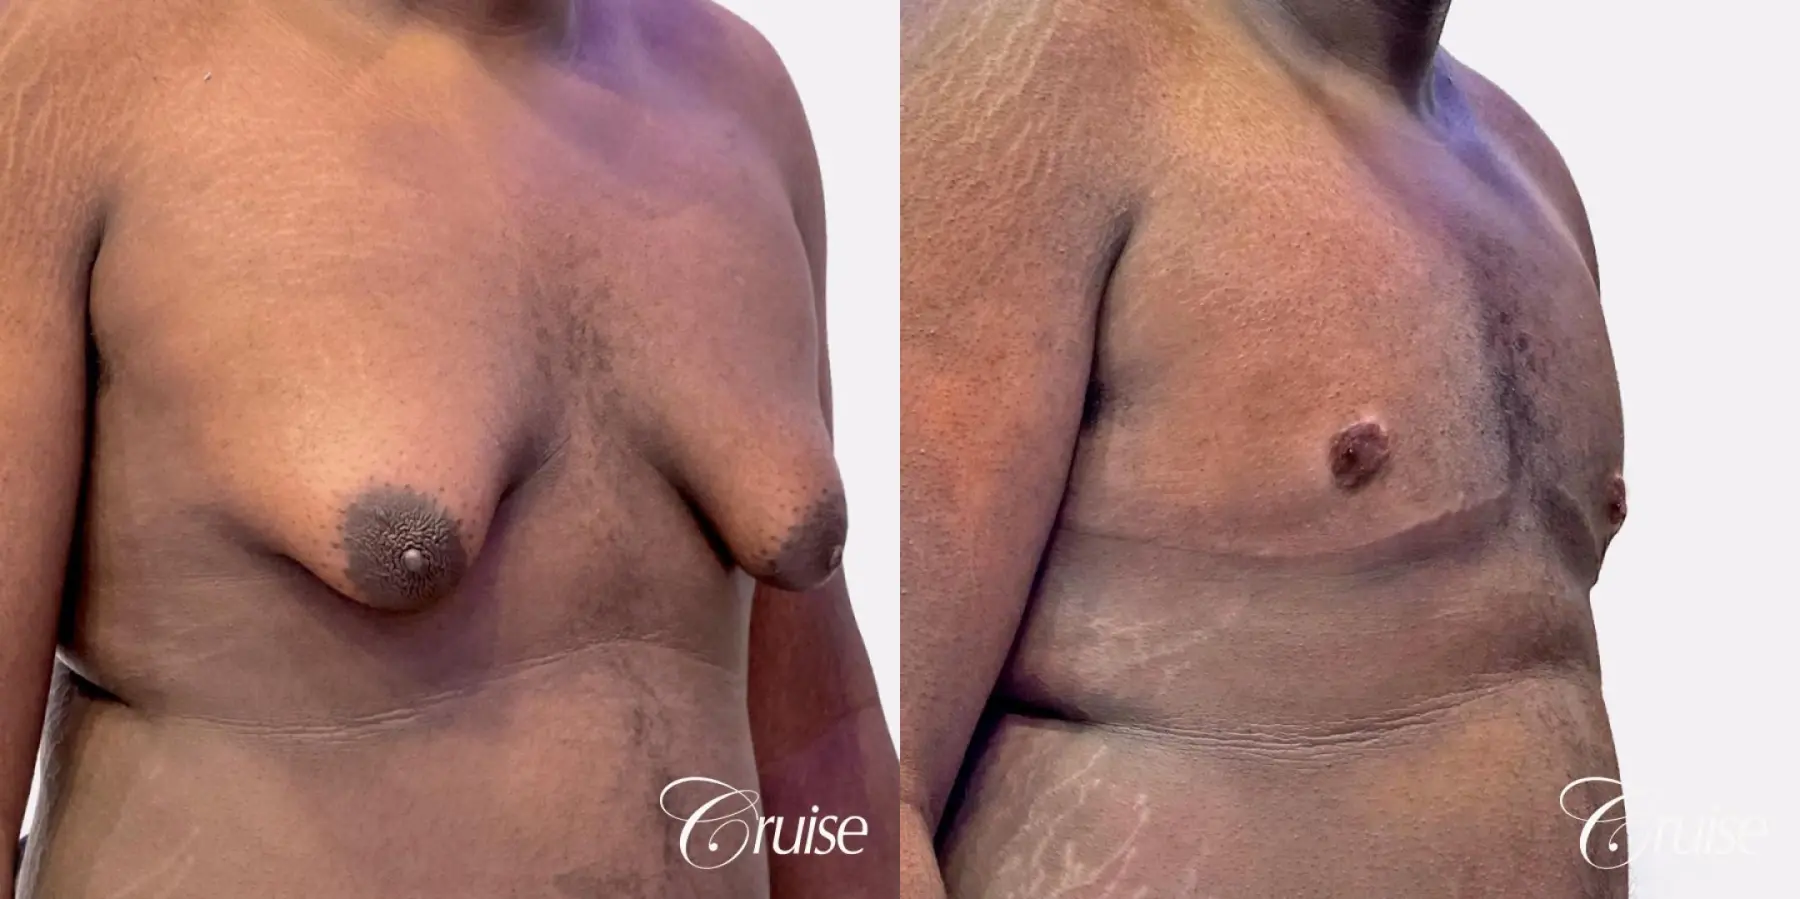 Gynecomastia Type 4 - Before and After 3